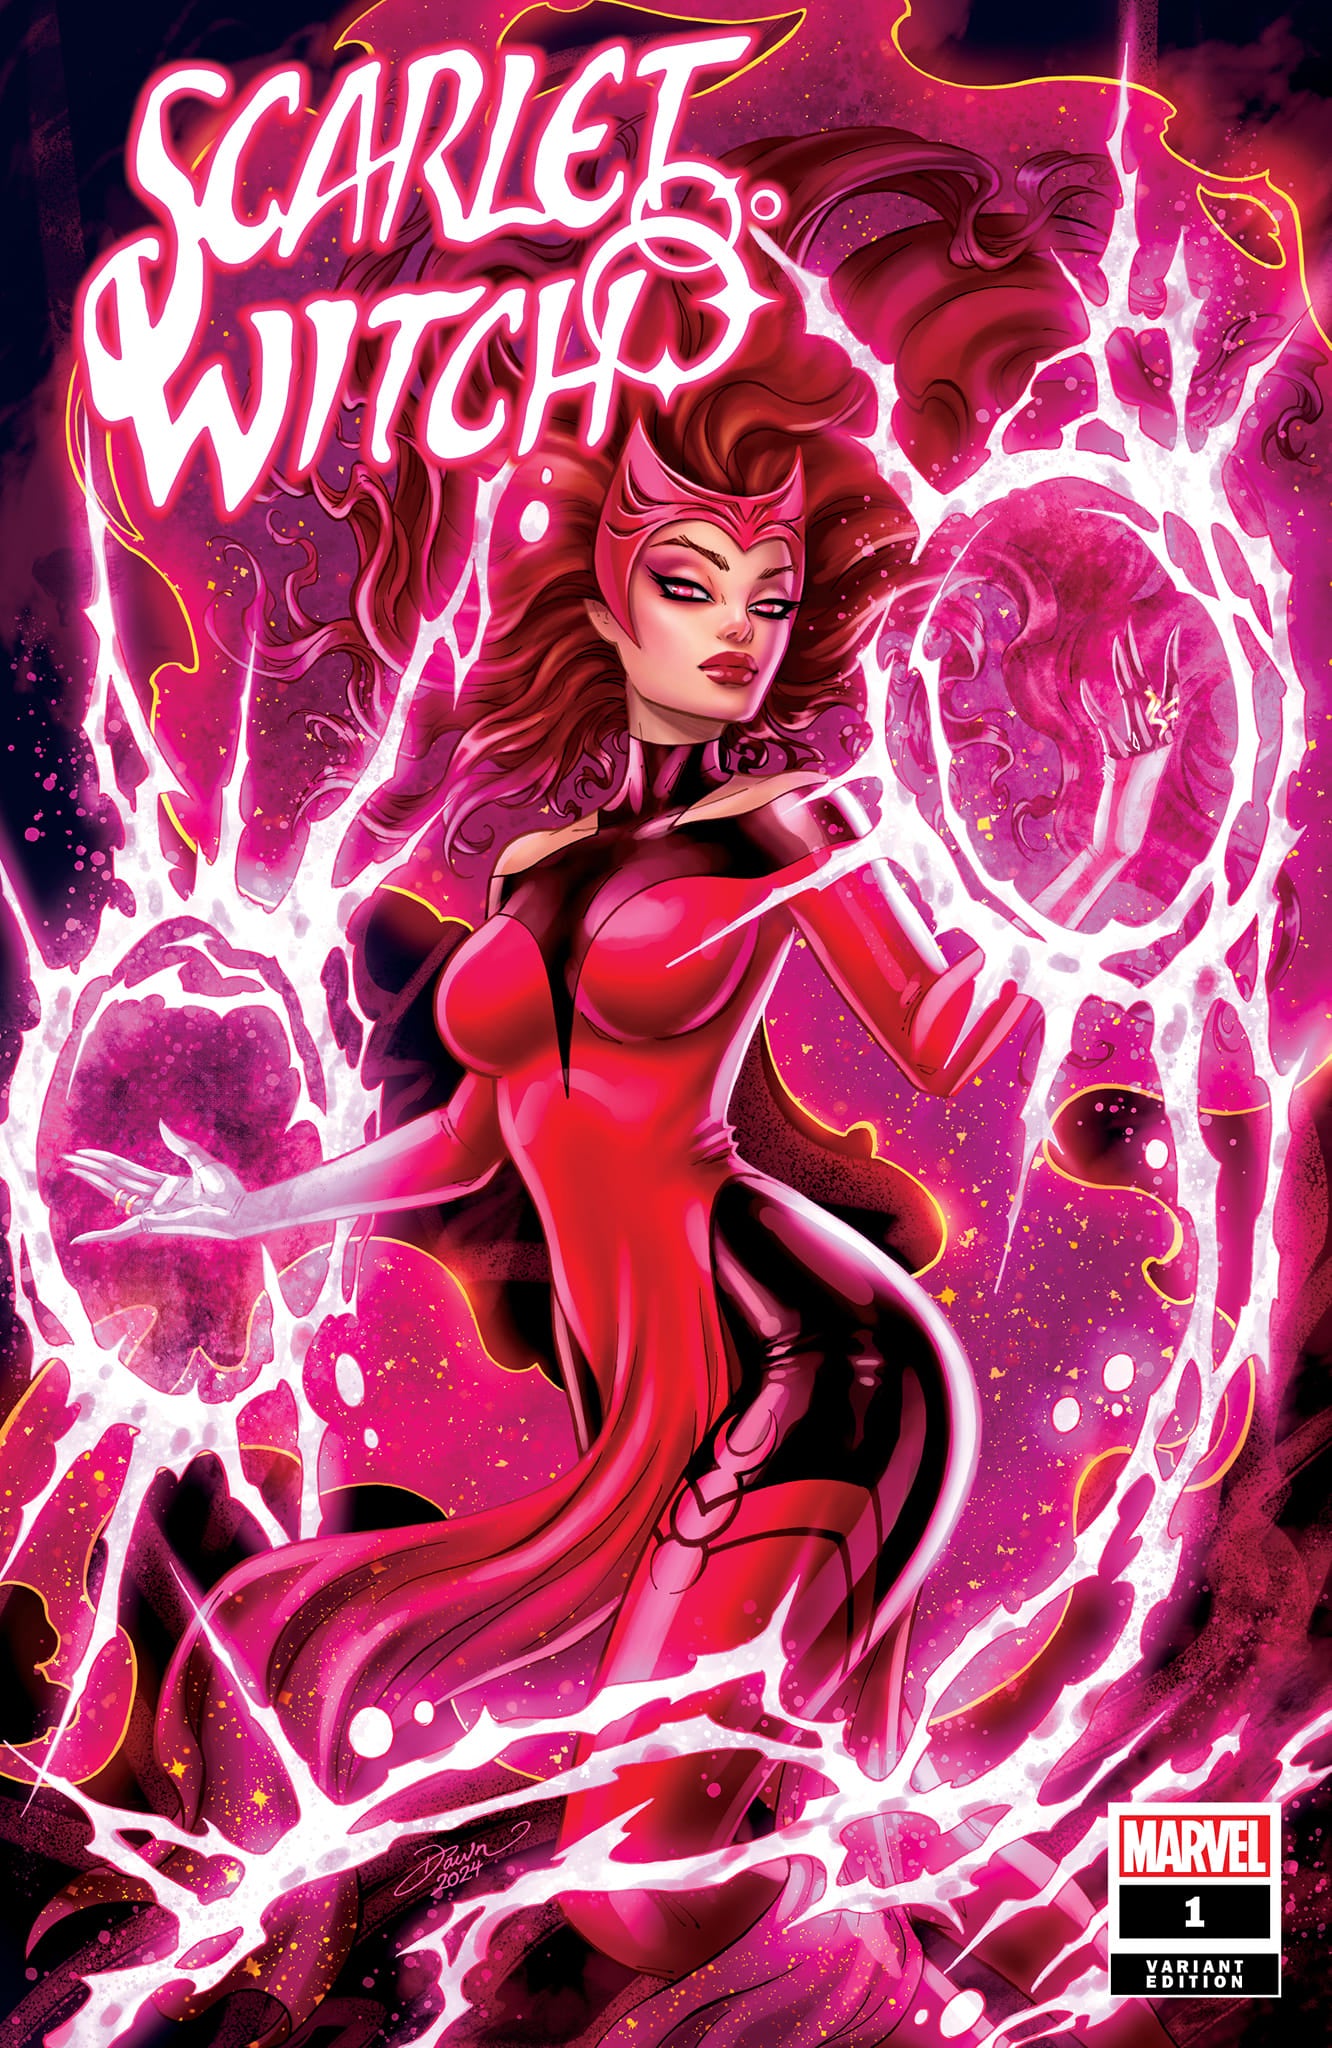 SCARLET WITCH #1 DAWN MCTEIGUE FIRST MARVEL COMICS EXCLUSIVE VARIANT OPTIONS06-12-24